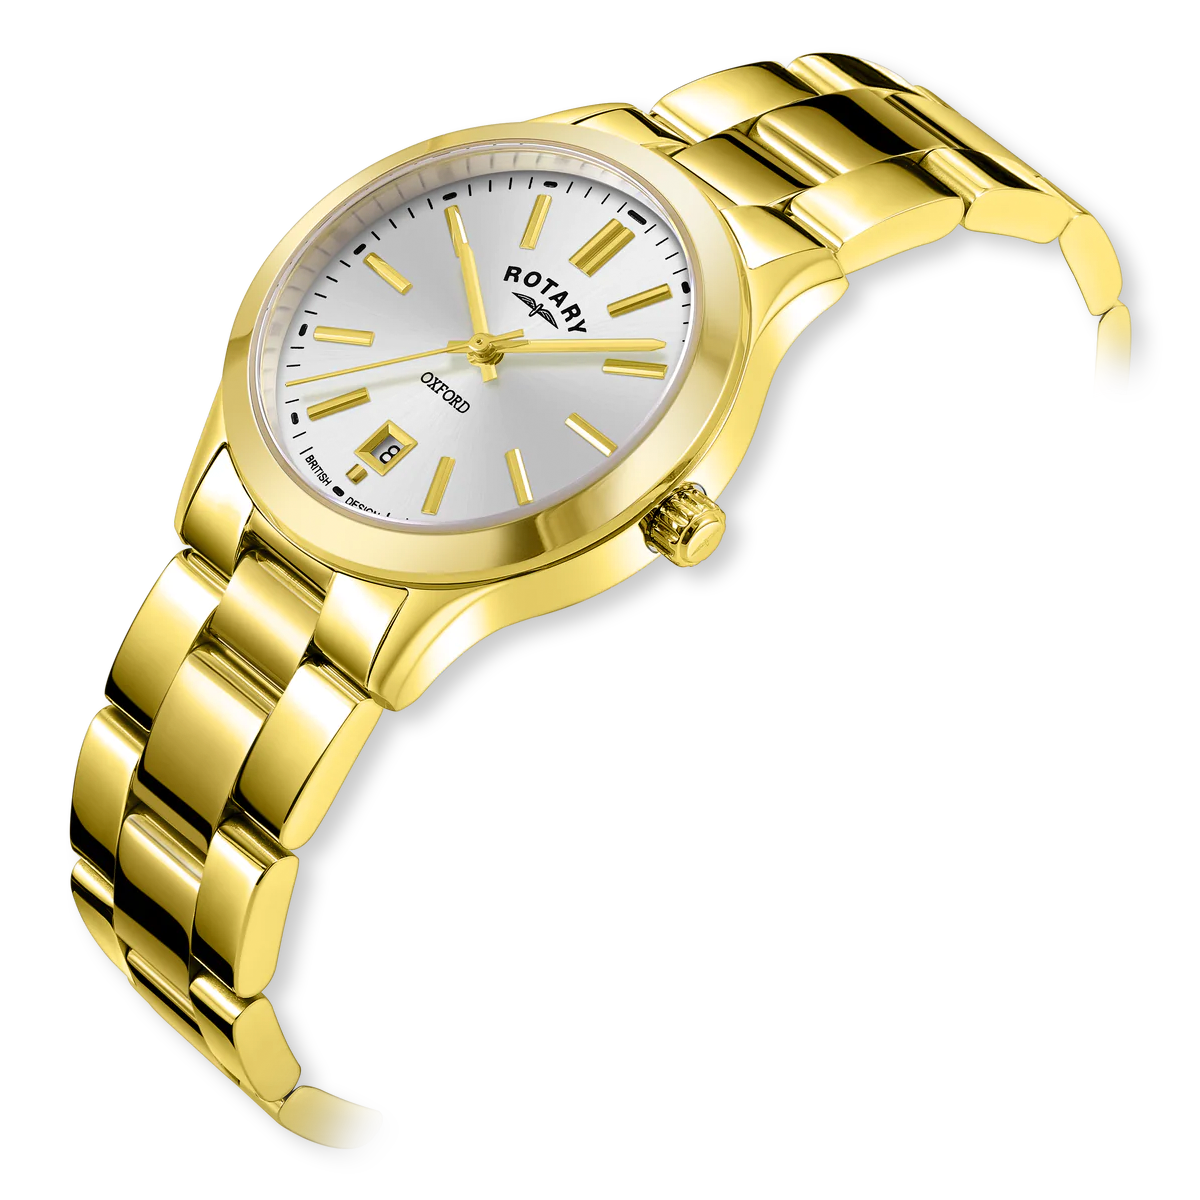 Rotary Oxford Watch, White Dial with Gold Plated Bracelet - LB05523/06